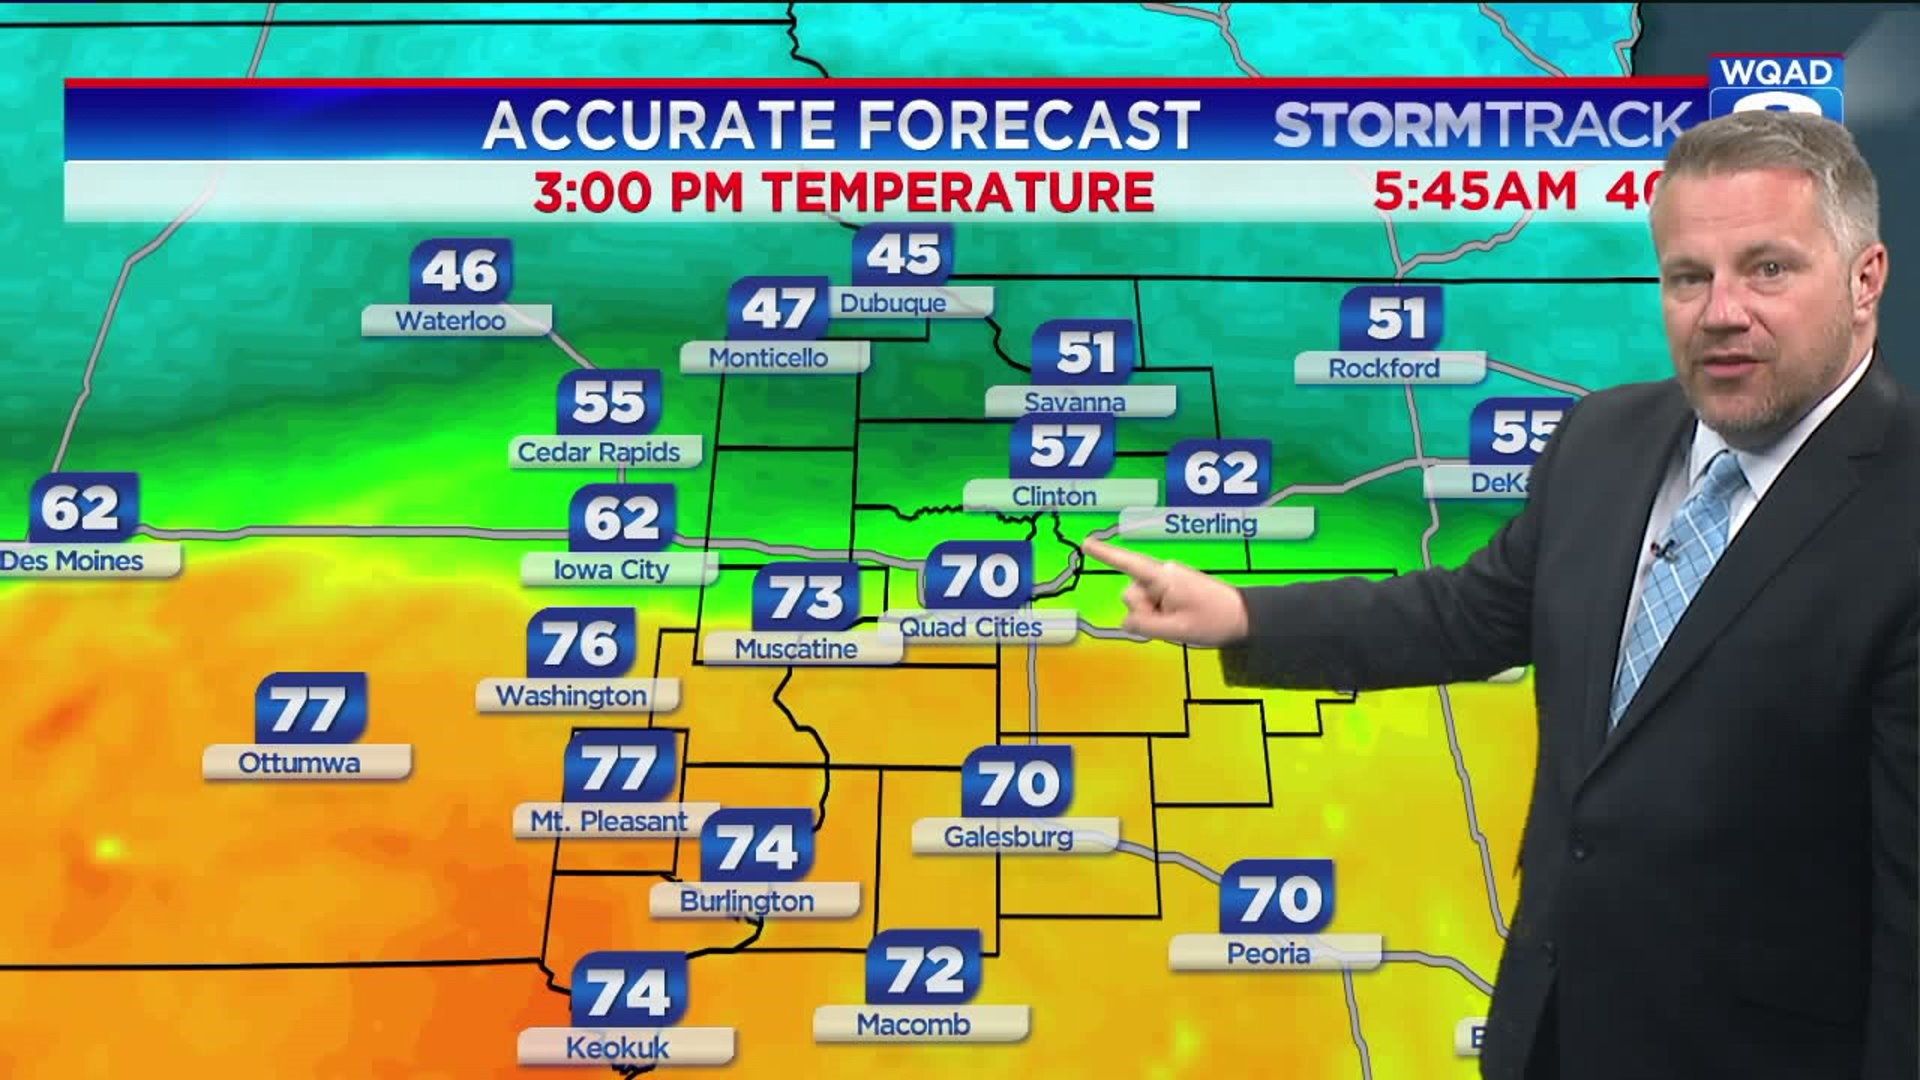 Eric goes in depth with the major spread in temperatures today